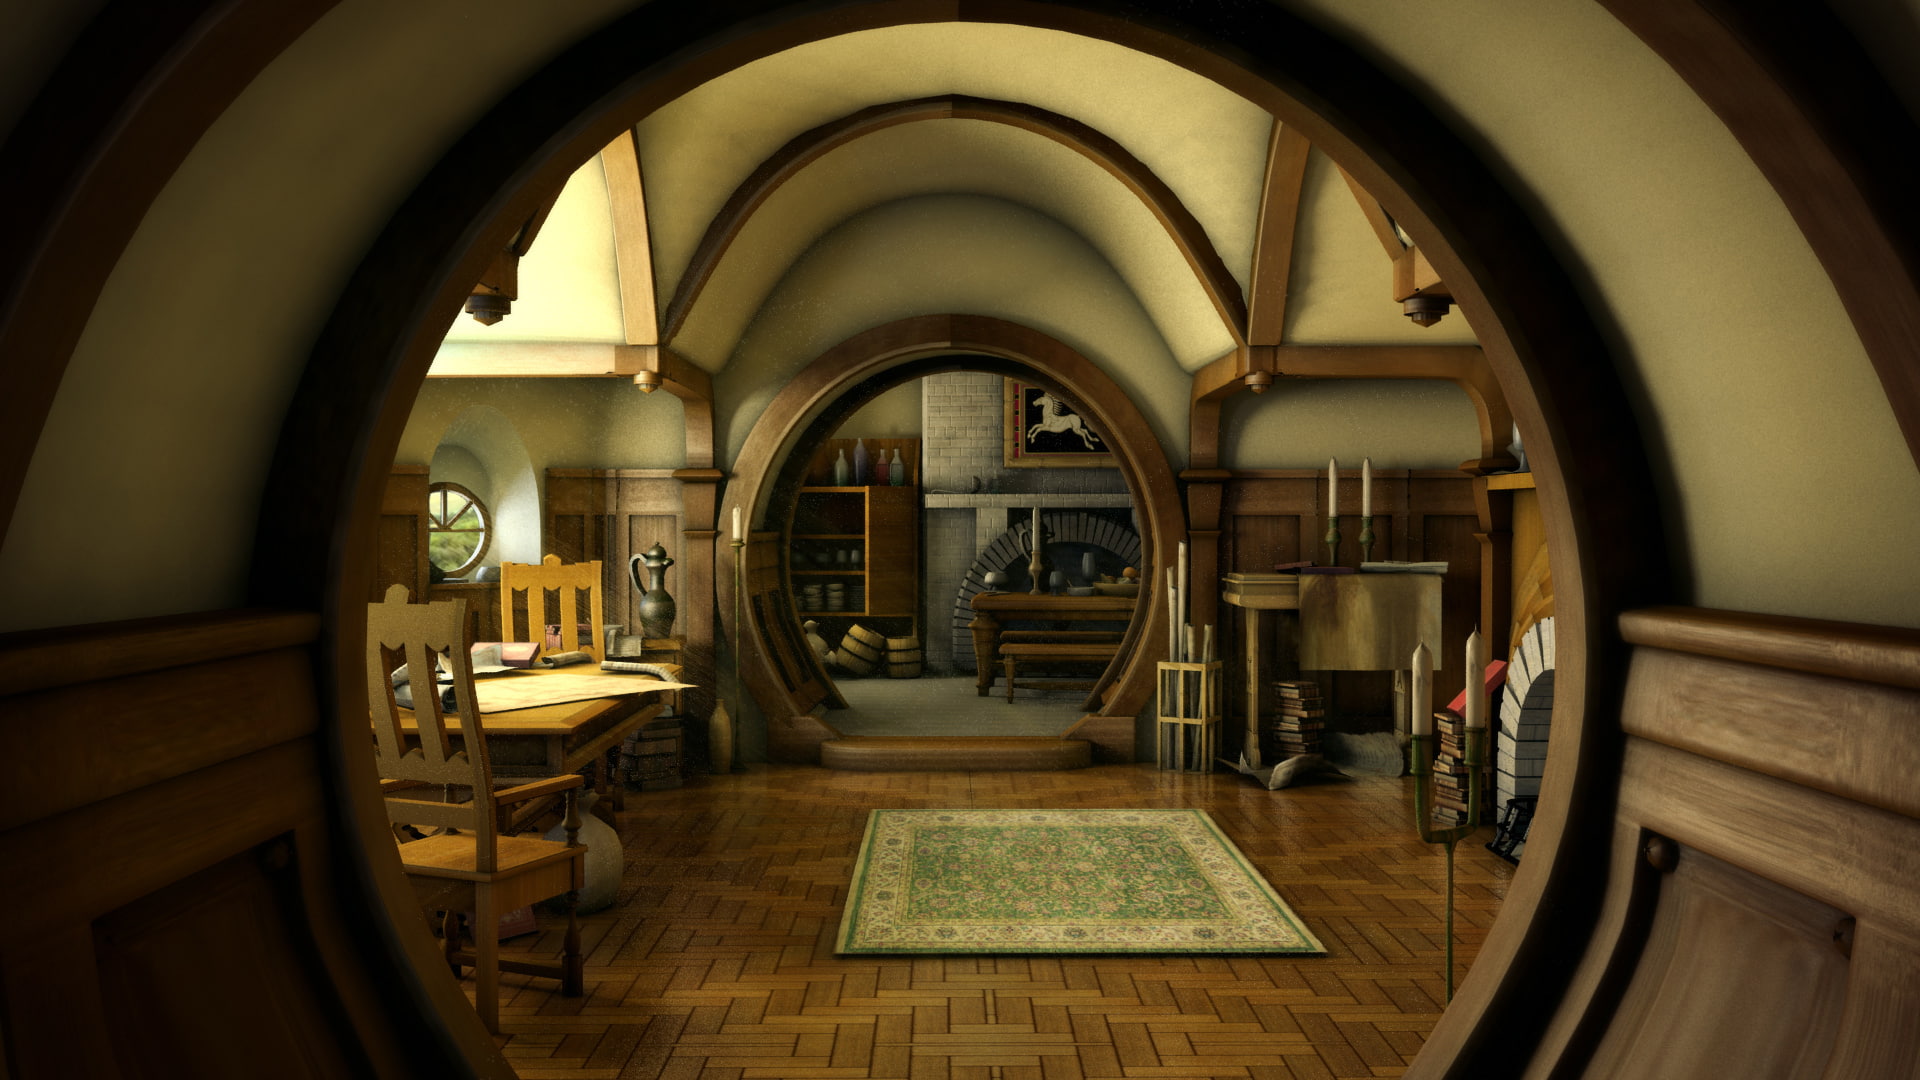 room, The Lord of the Rings, Bag End, movies, interior